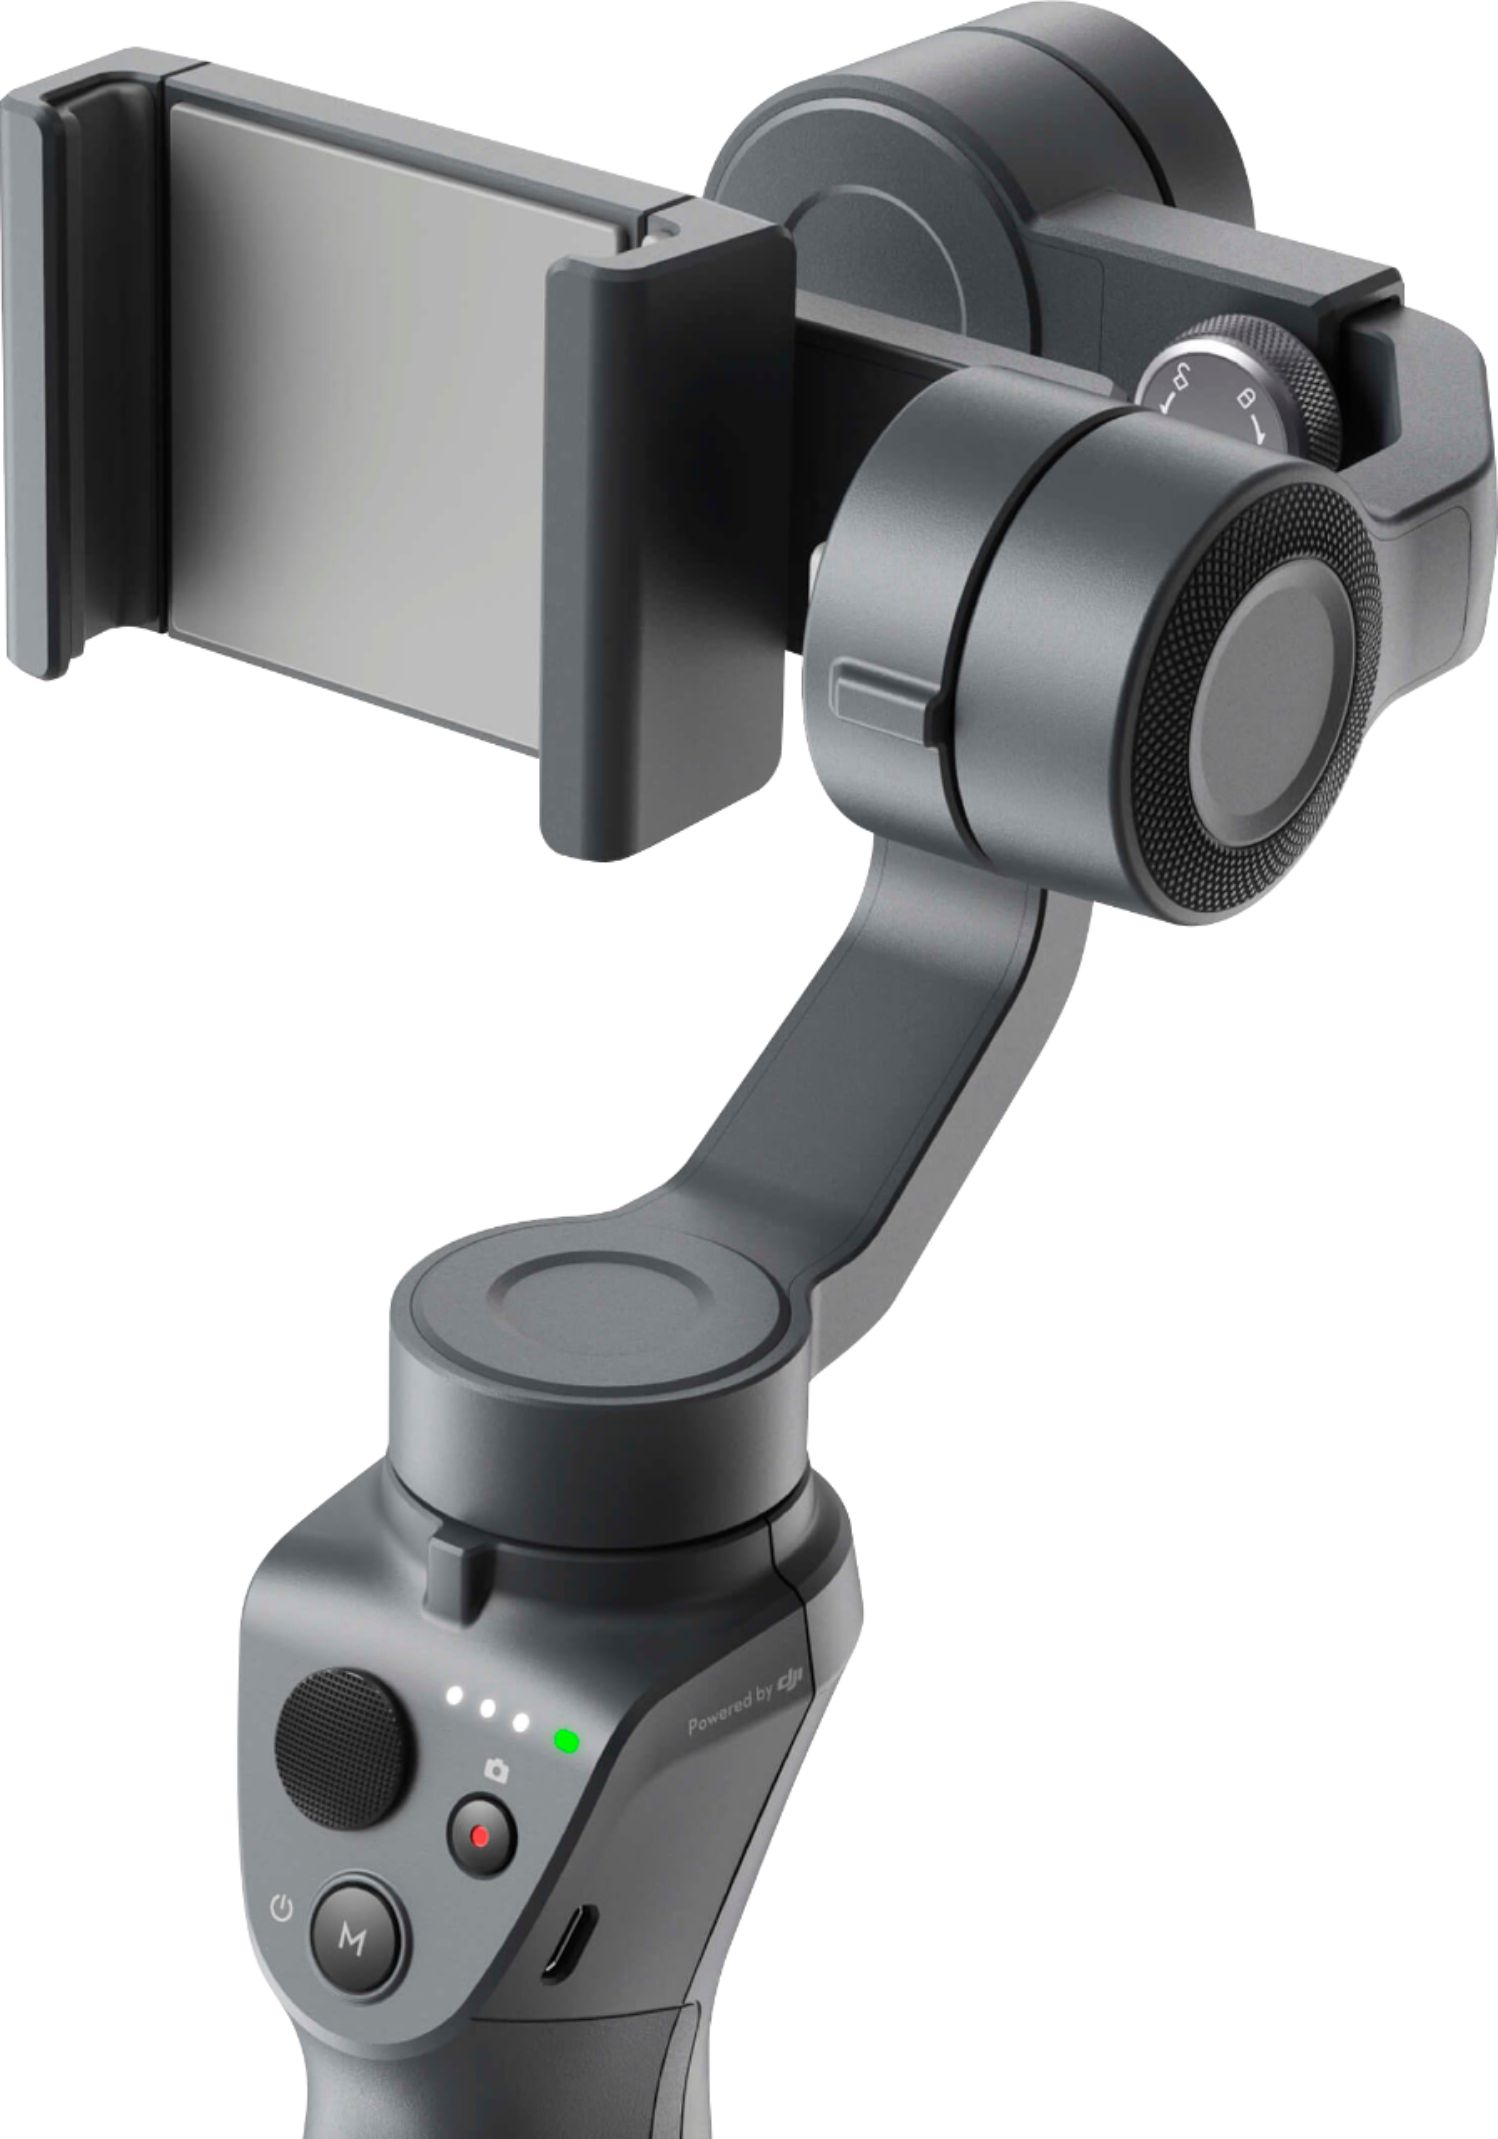 DJI Osmo Mobile 2 3-Axis Gimbal Stabilizer for Mobile Phones Gray - Best Buy